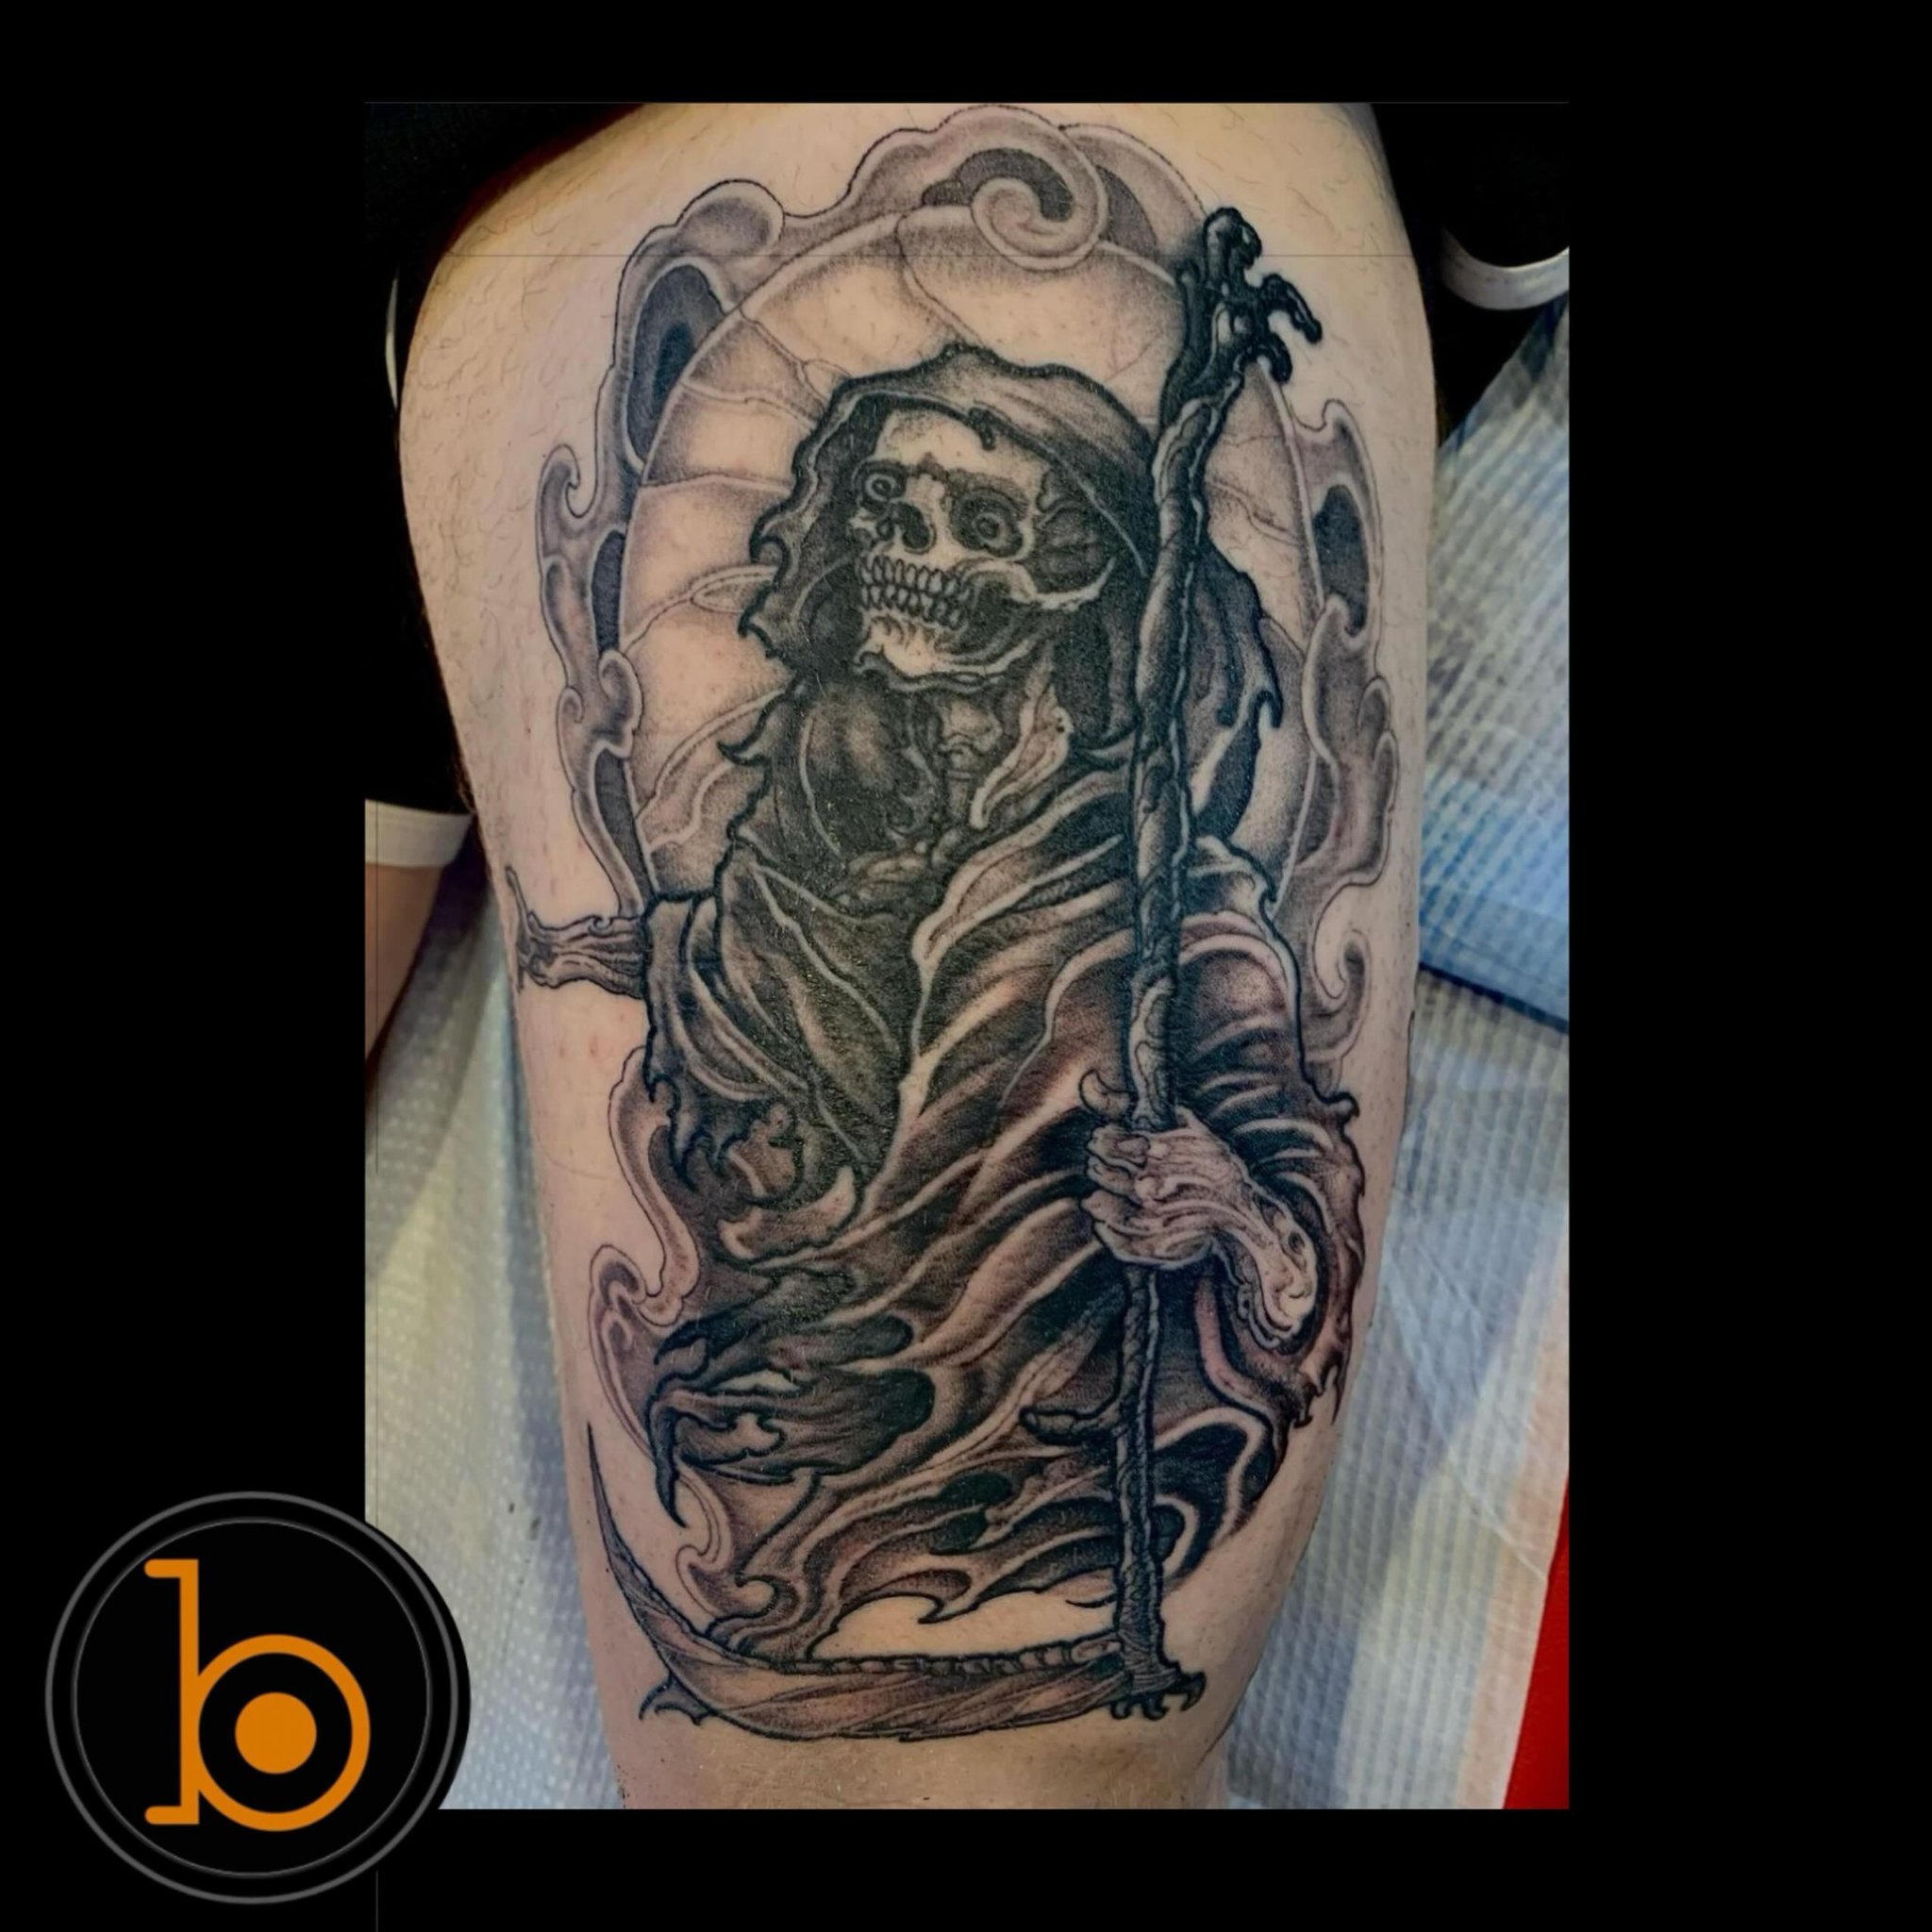 Guess this spooky fellas favorite color!? First one to get it right in the comments gets a high five. Reaper by resident artist @kevinberubetattooer 💀🤪
➖➖➖➖➖➖➖➖➖➖➖➖➖➖➖➖➖
Blueprint Gallery
138 Russell St
 Hadley MA 01035
📱(413)-387-0221 
WALK-INS W